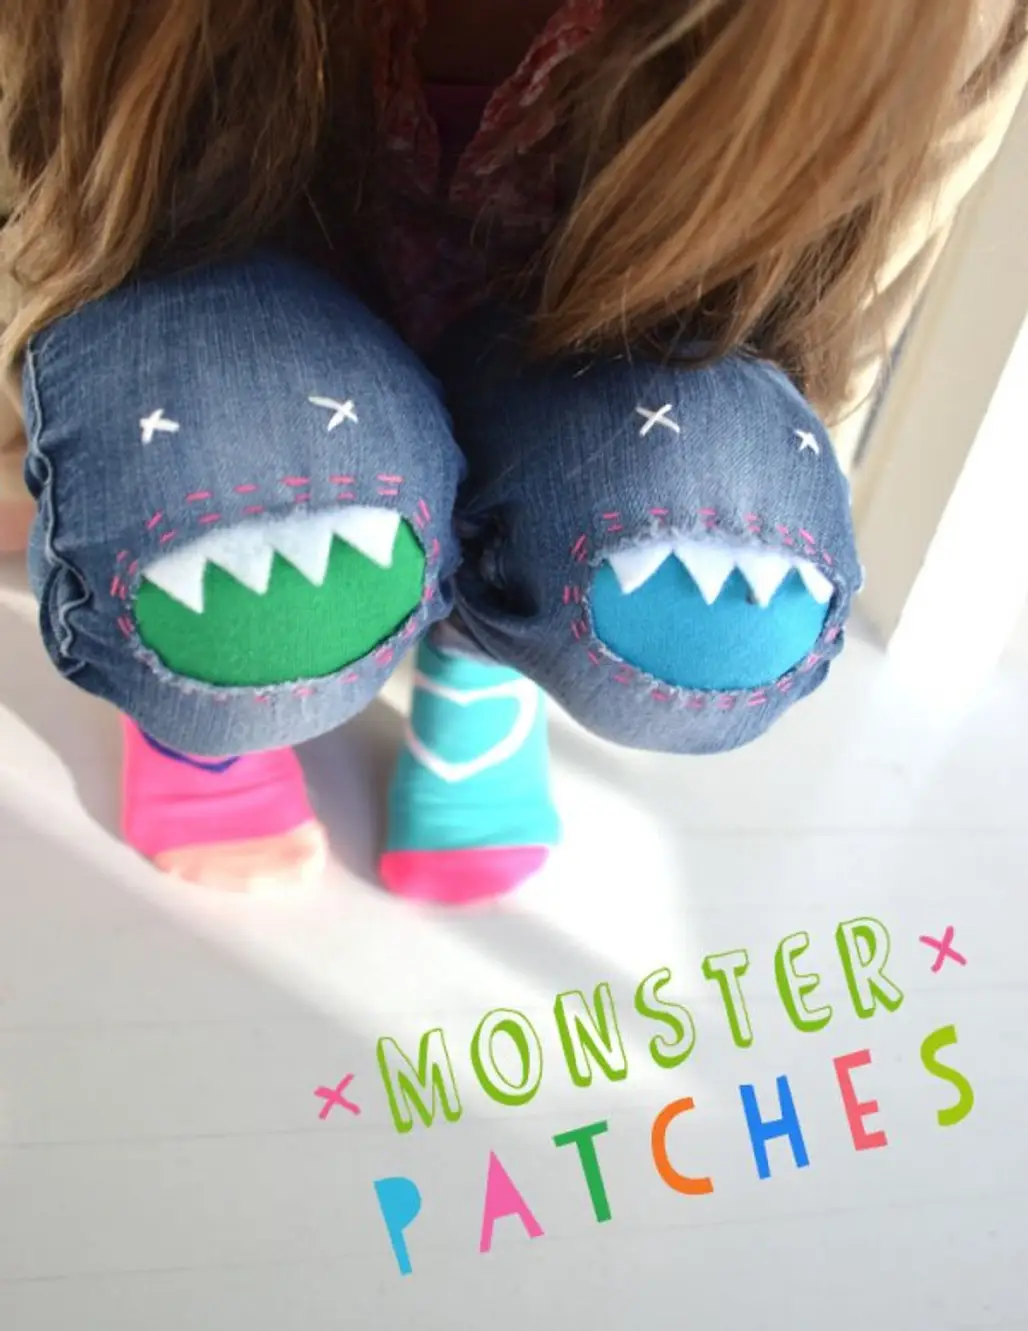 Aren't These Monster Patches Cute?!